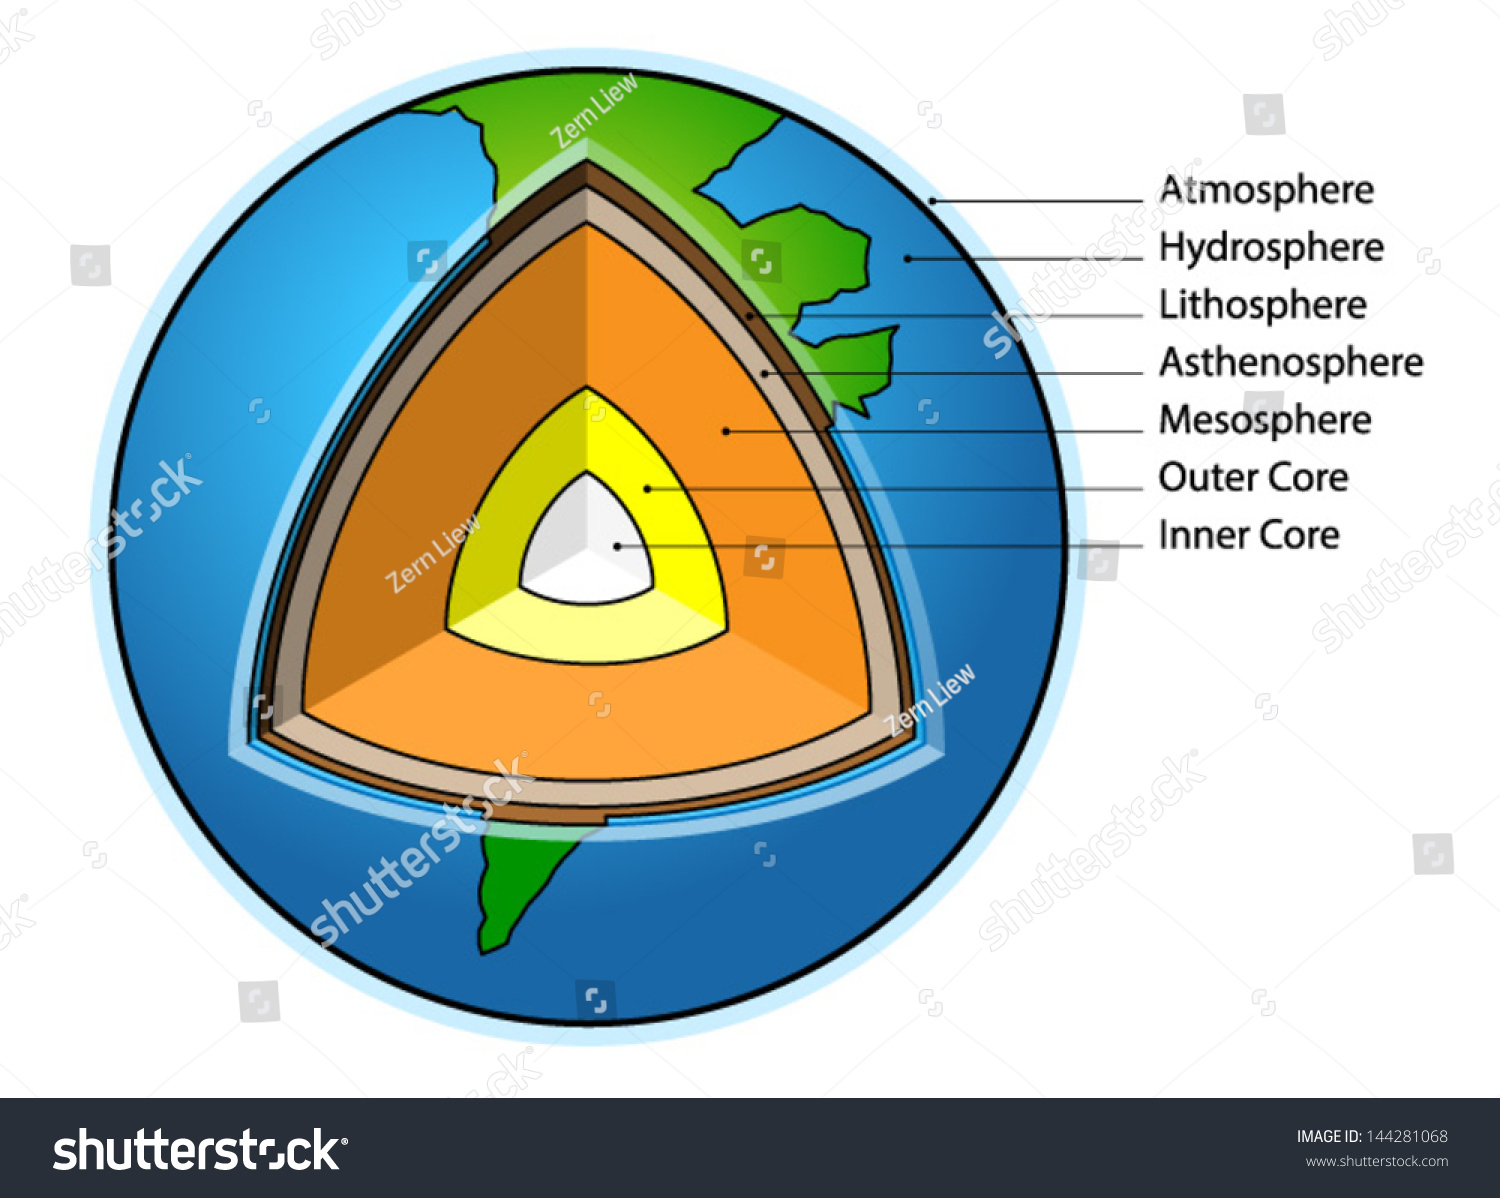 Sectional Diagram Showing The Structure Of The Earth ...